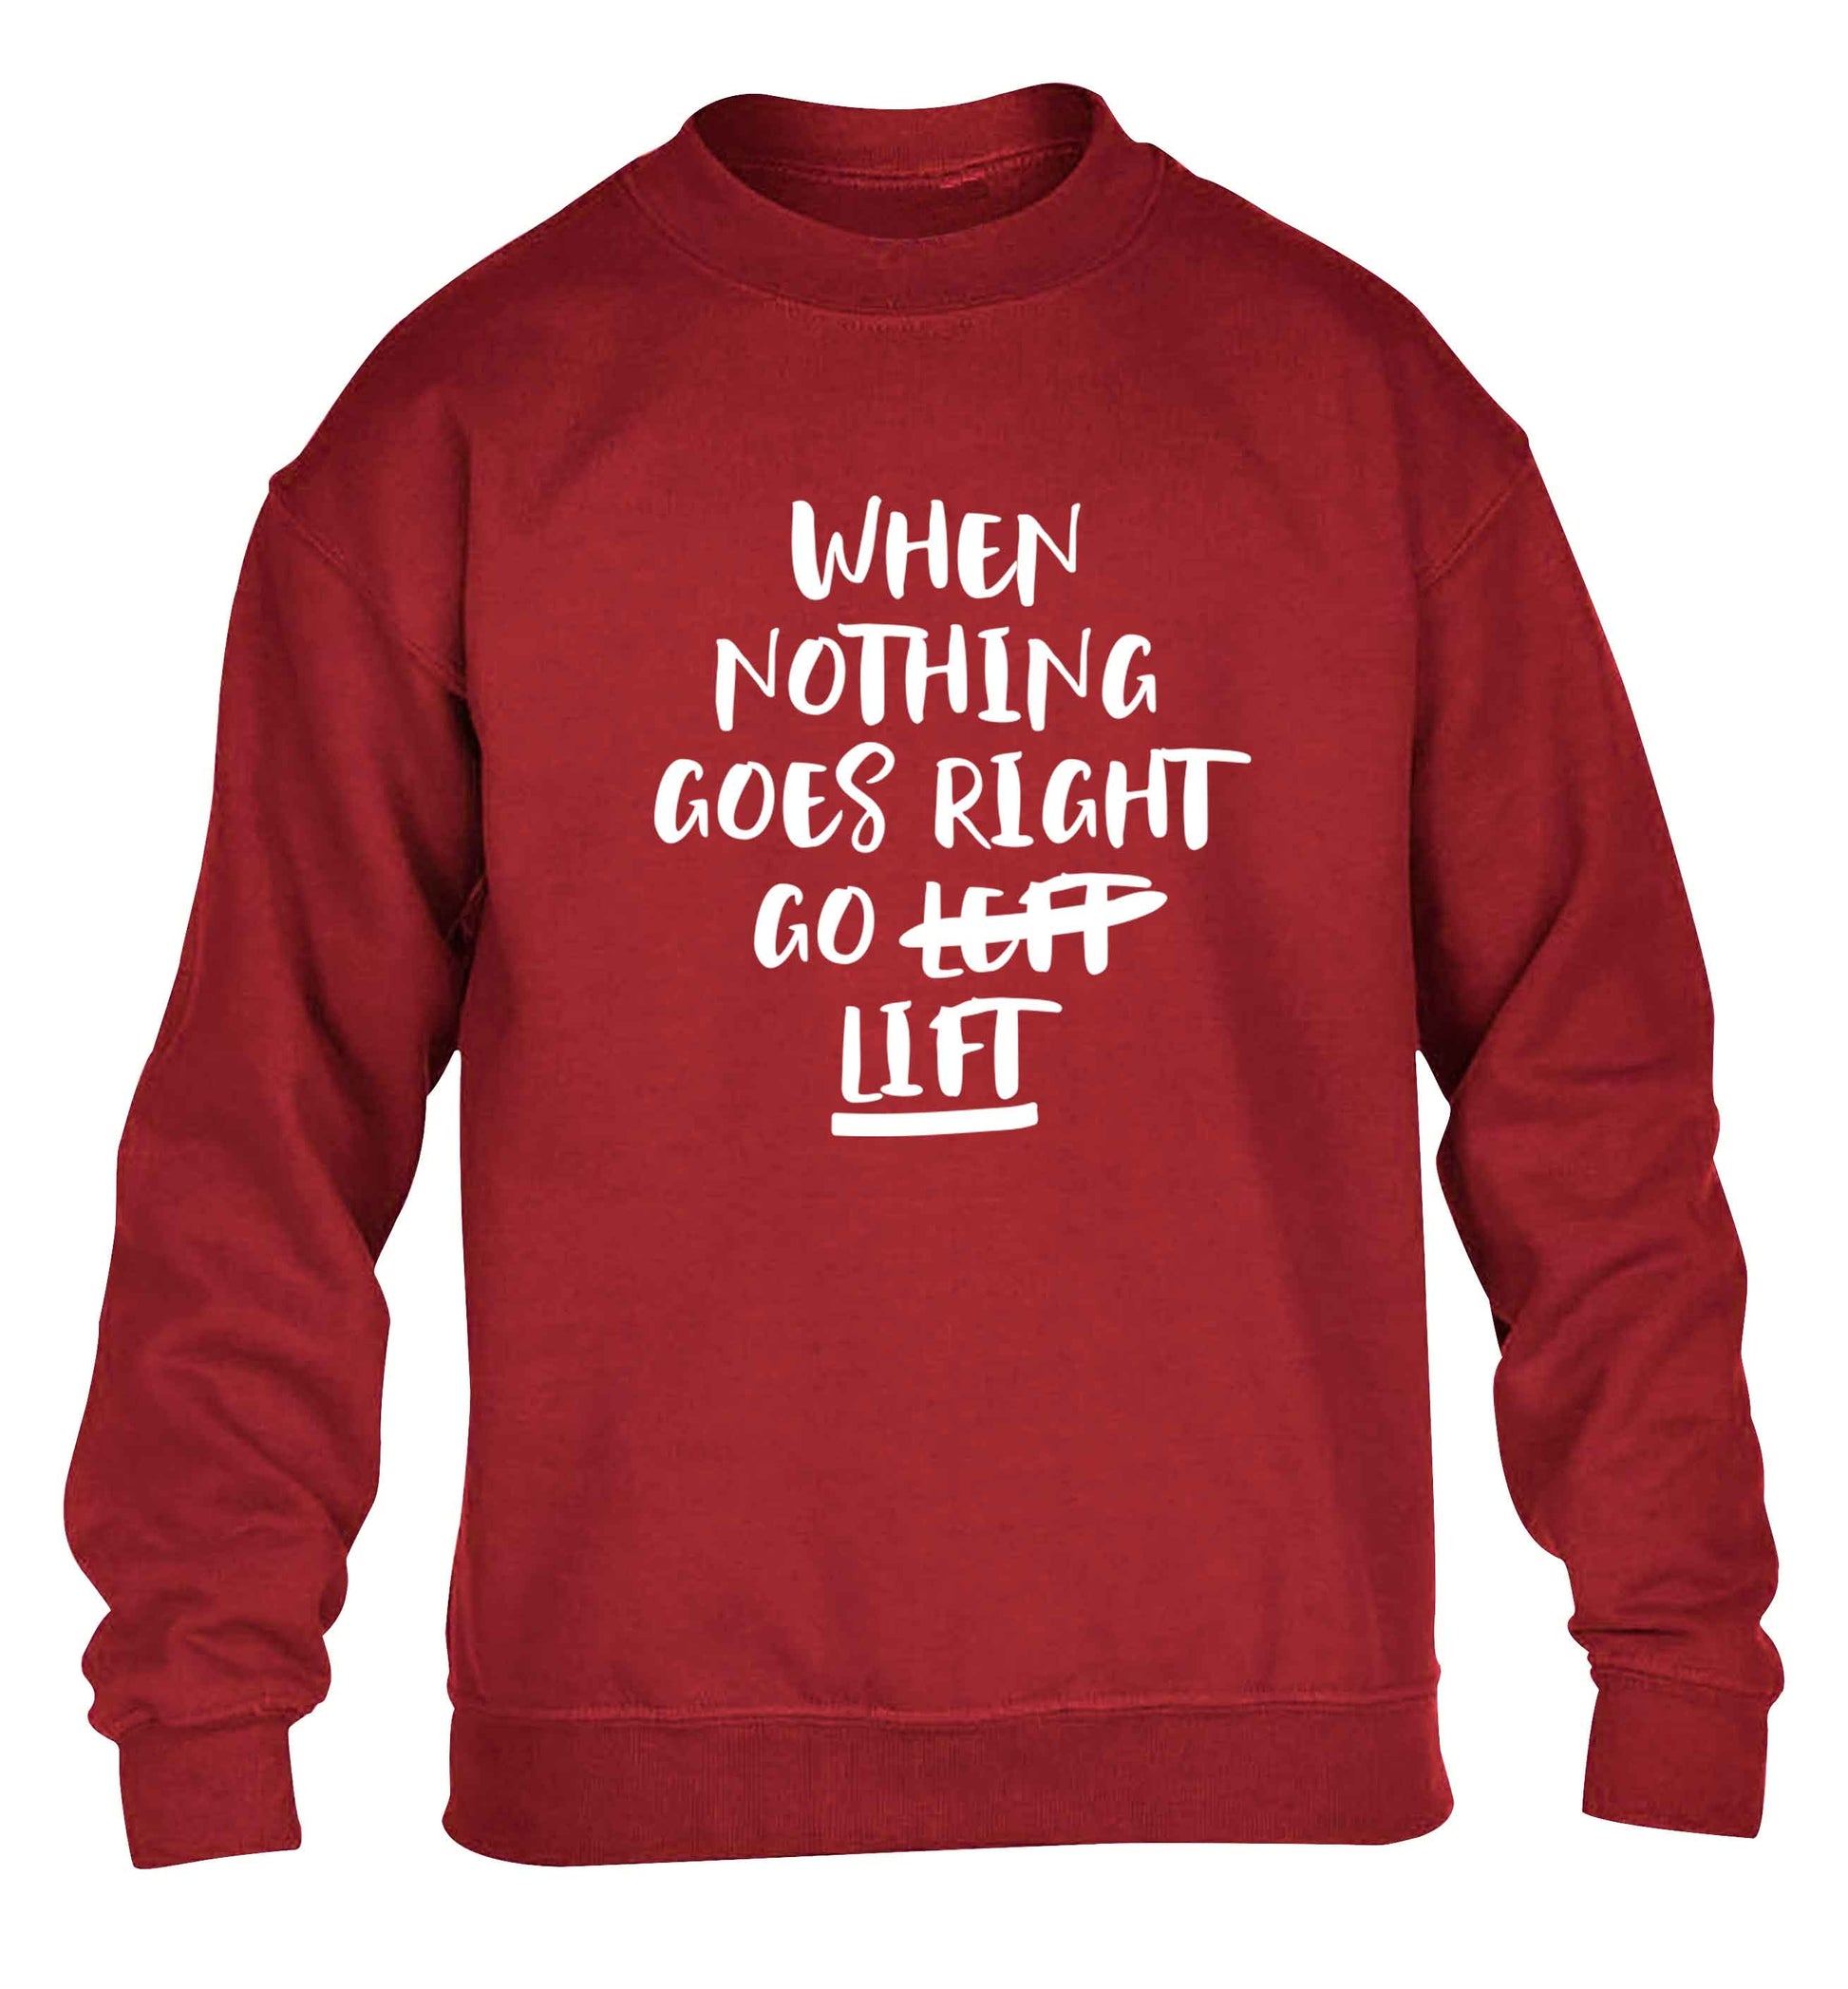 When nothing goes right go lift children's grey sweater 12-13 Years